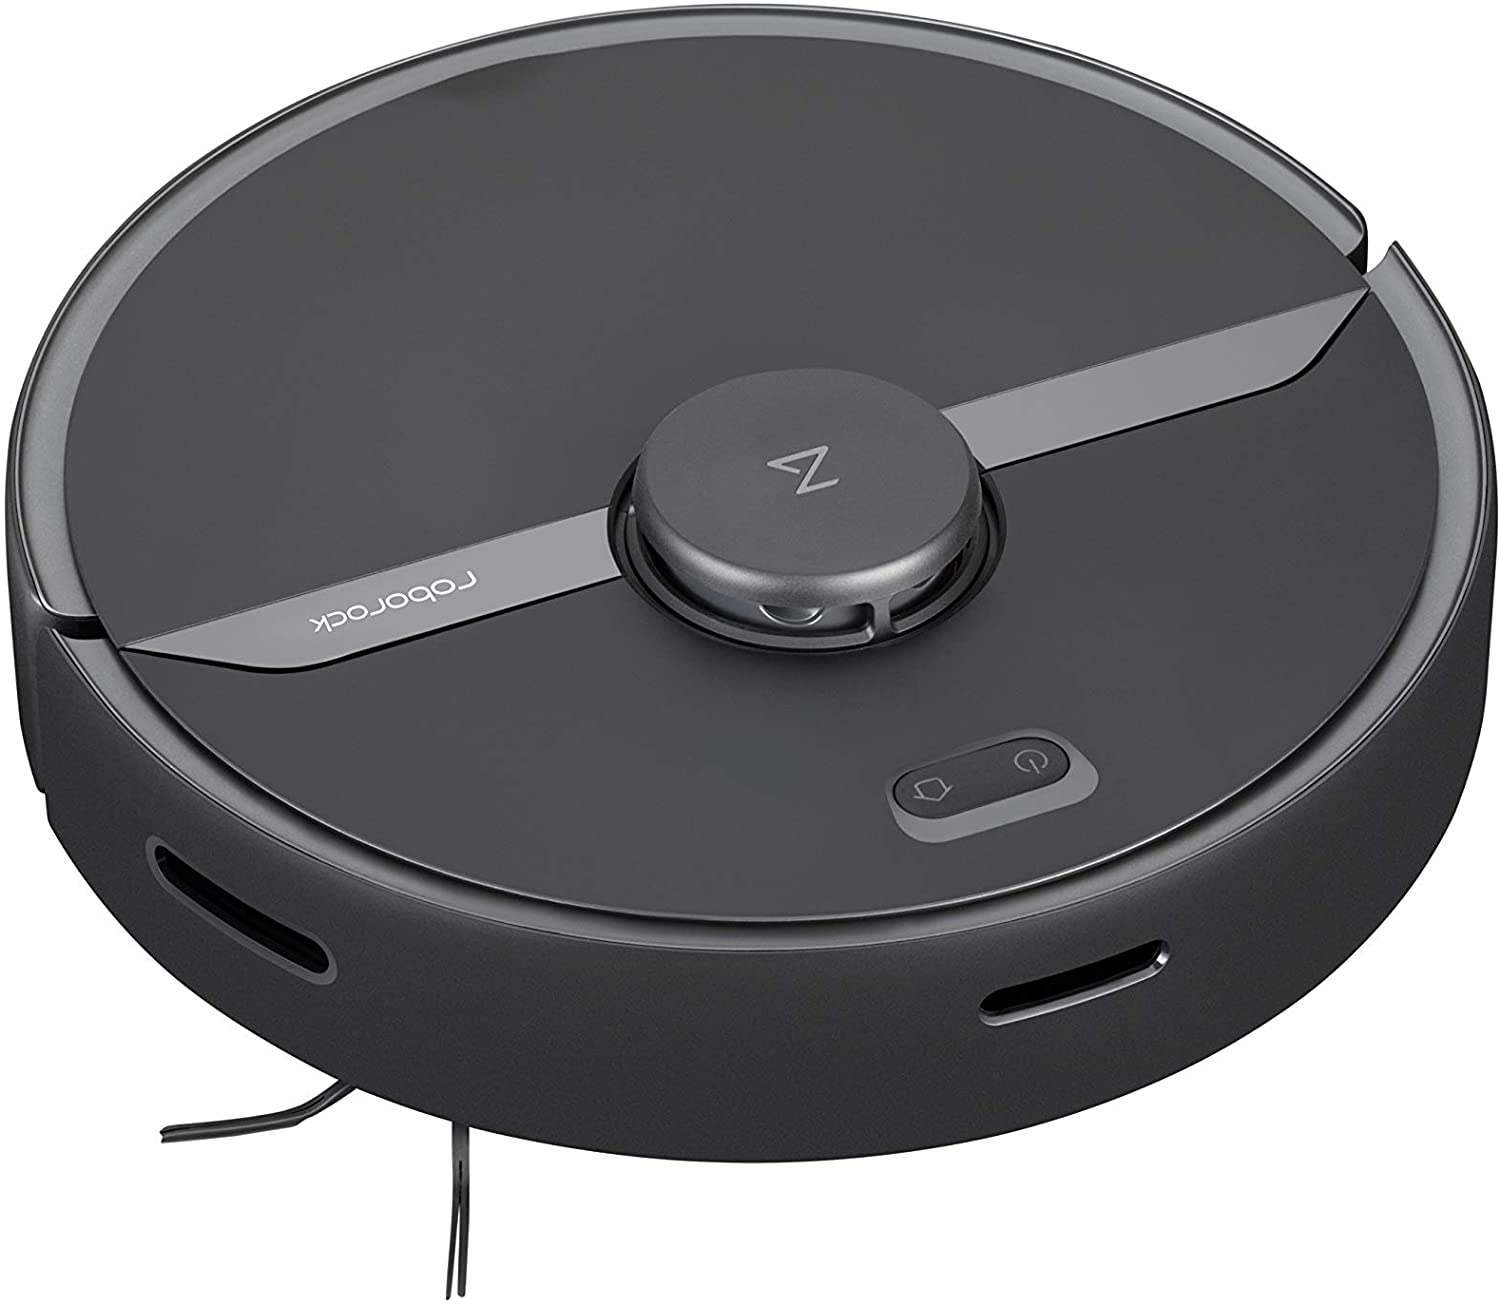 Roborock S6 Pure Robot Vacuum and Mop, Multi-Floor Mapping, Lidar Navigation, No-go Zones, Selective Room Cleaning, Super Strong Suction Robotic Vacuum Cleaner, Wi-Fi Connected, Alexa Voice Control